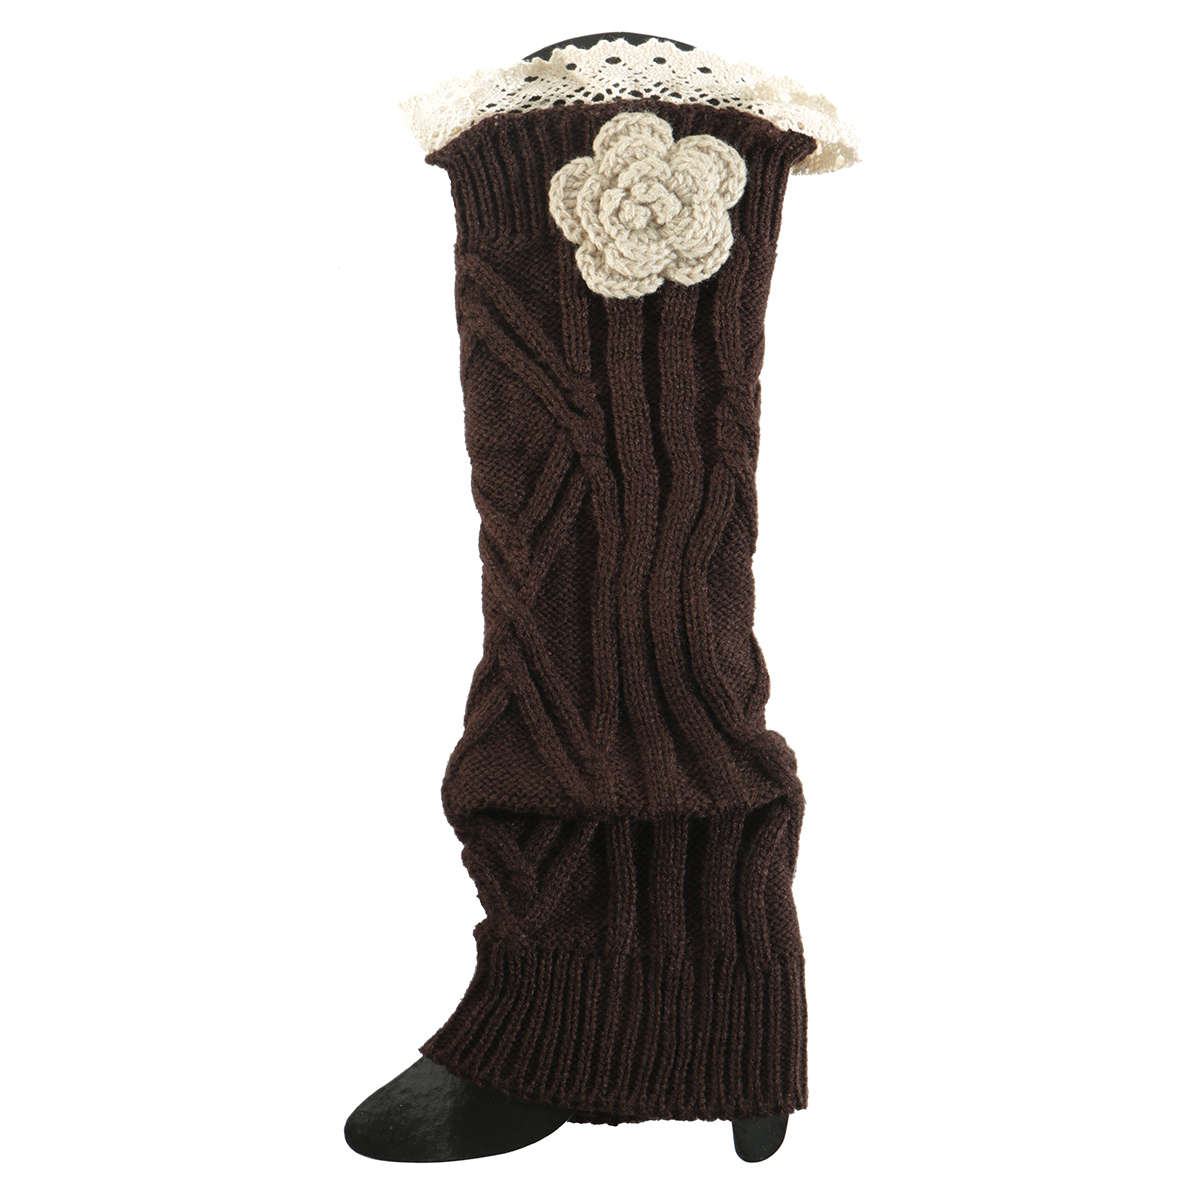 b50 BOOT CUFF LACE BROWN TALL 4.5IN X 16.5IN KNIT